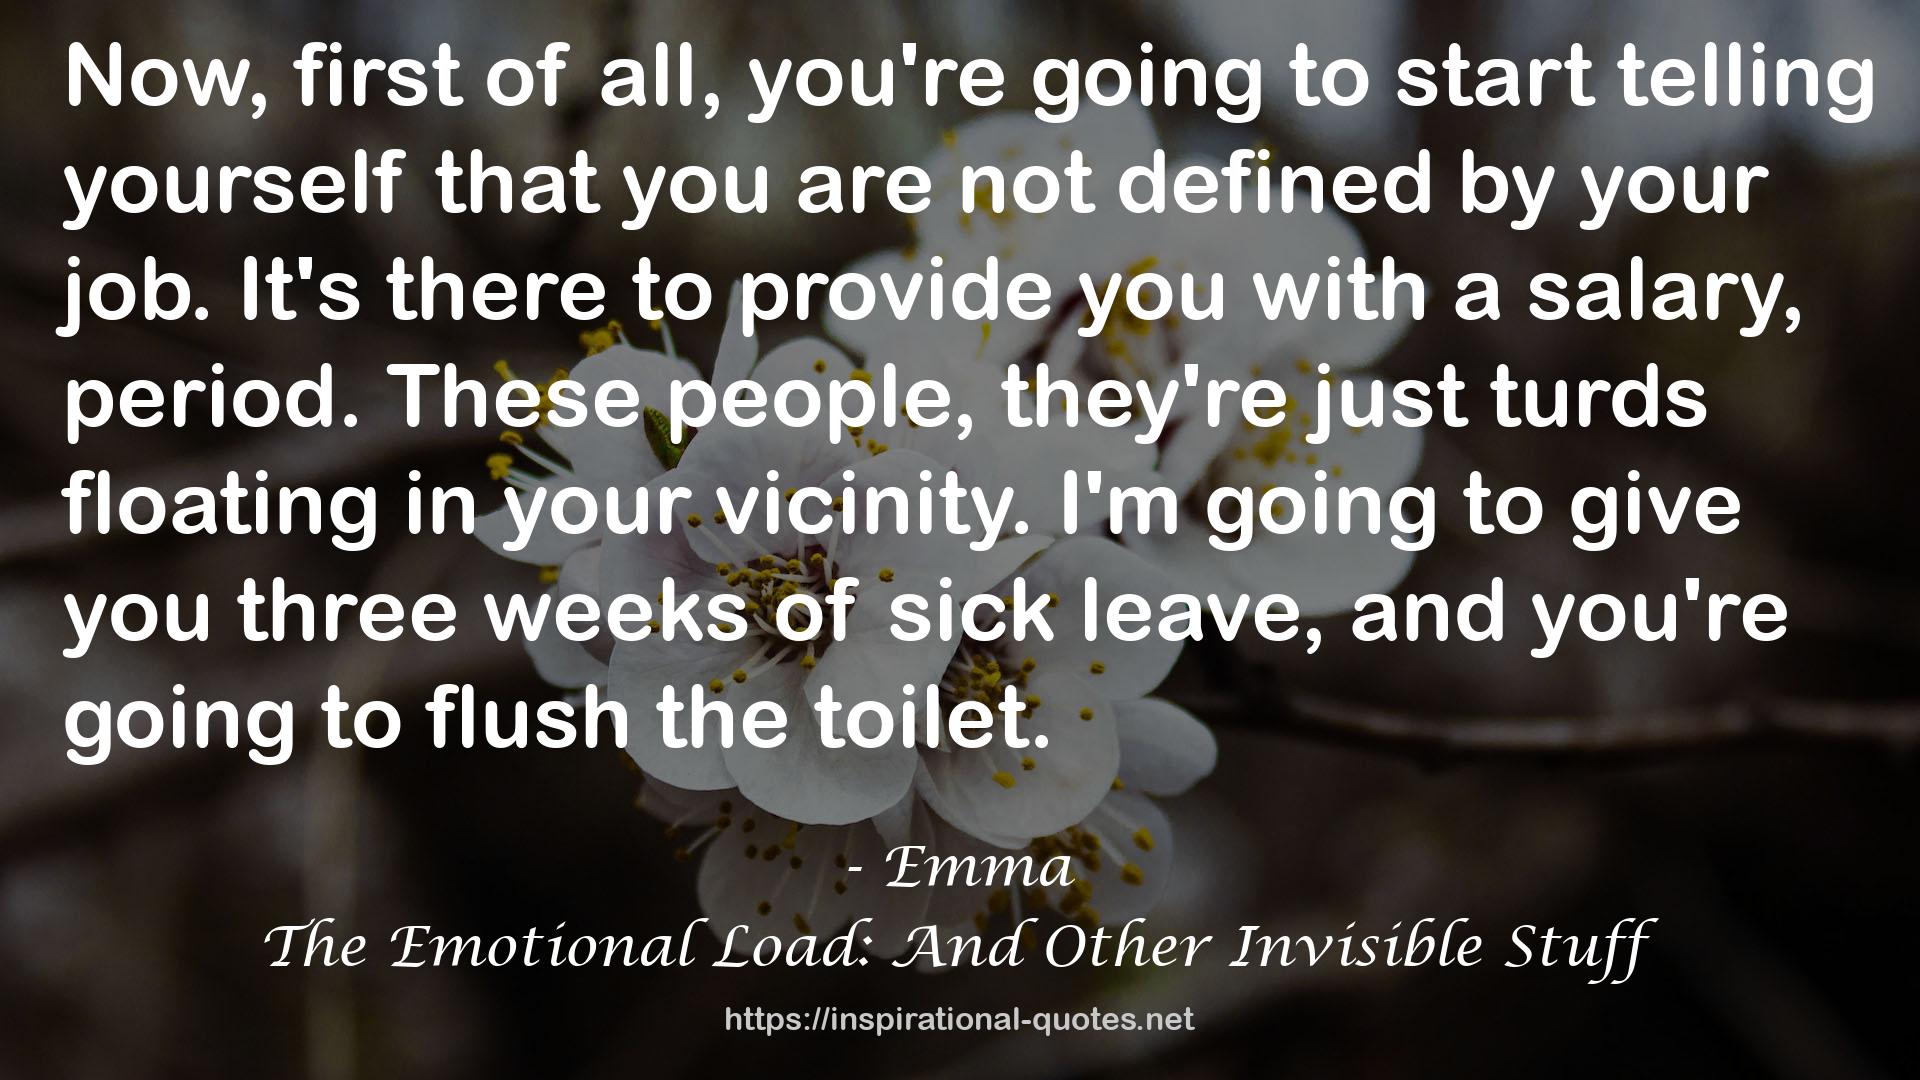 The Emotional Load: And Other Invisible Stuff QUOTES